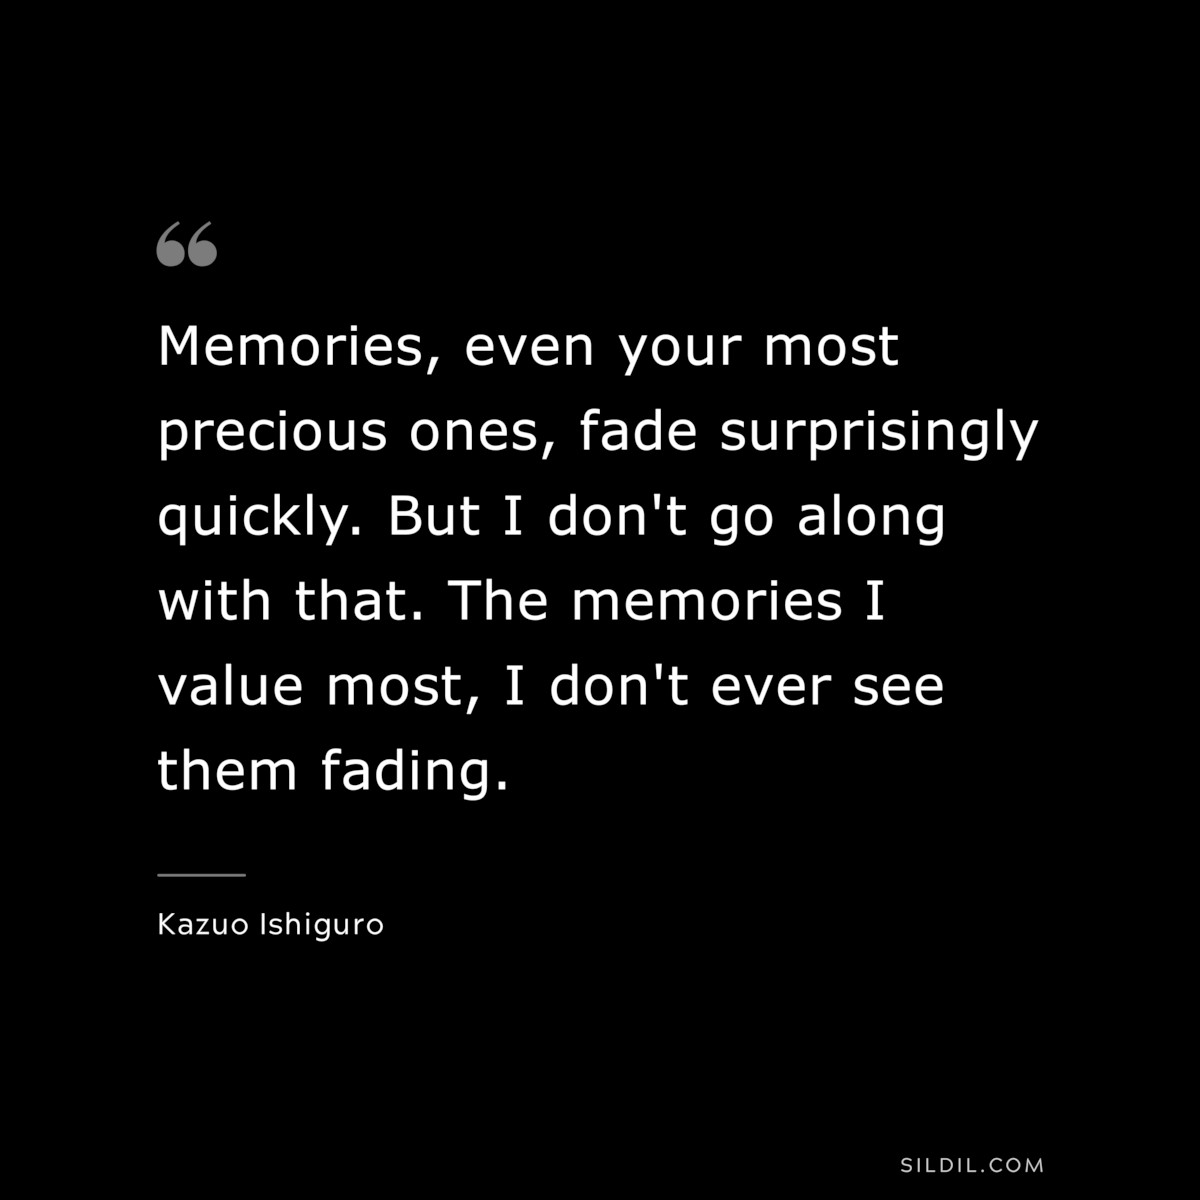 Memories, even your most precious ones, fade surprisingly quickly. But I don't go along with that. The memories I value most, I don't ever see them fading. ― Kazuo Ishiguro